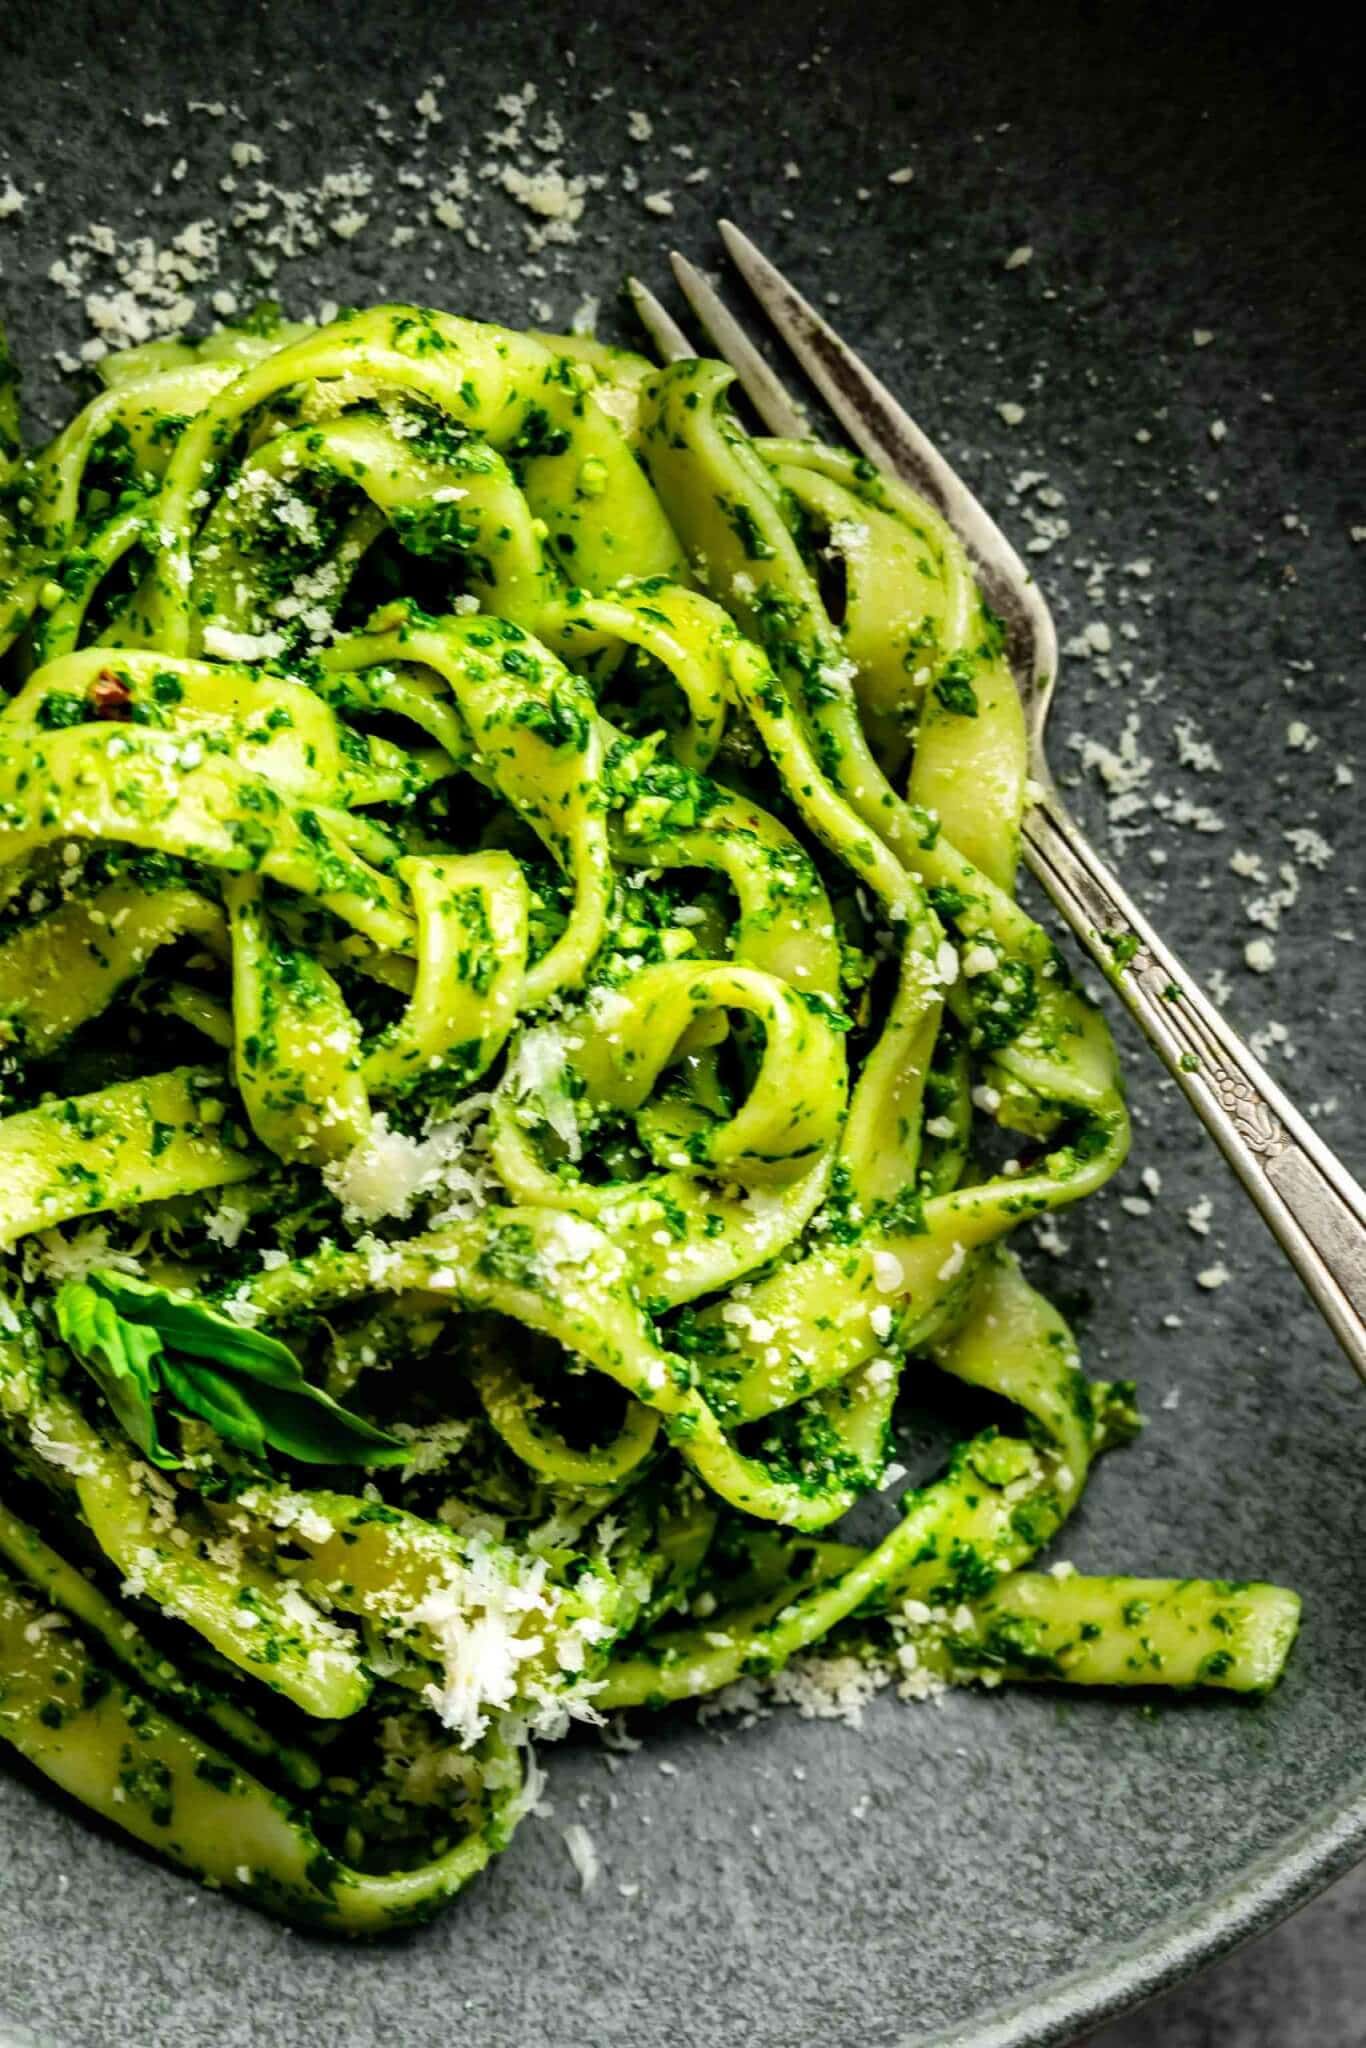 CLOSE UP OF KALE PESTO TOSSED WITH PASTA AND SPRINKLED WITH PARMESAN